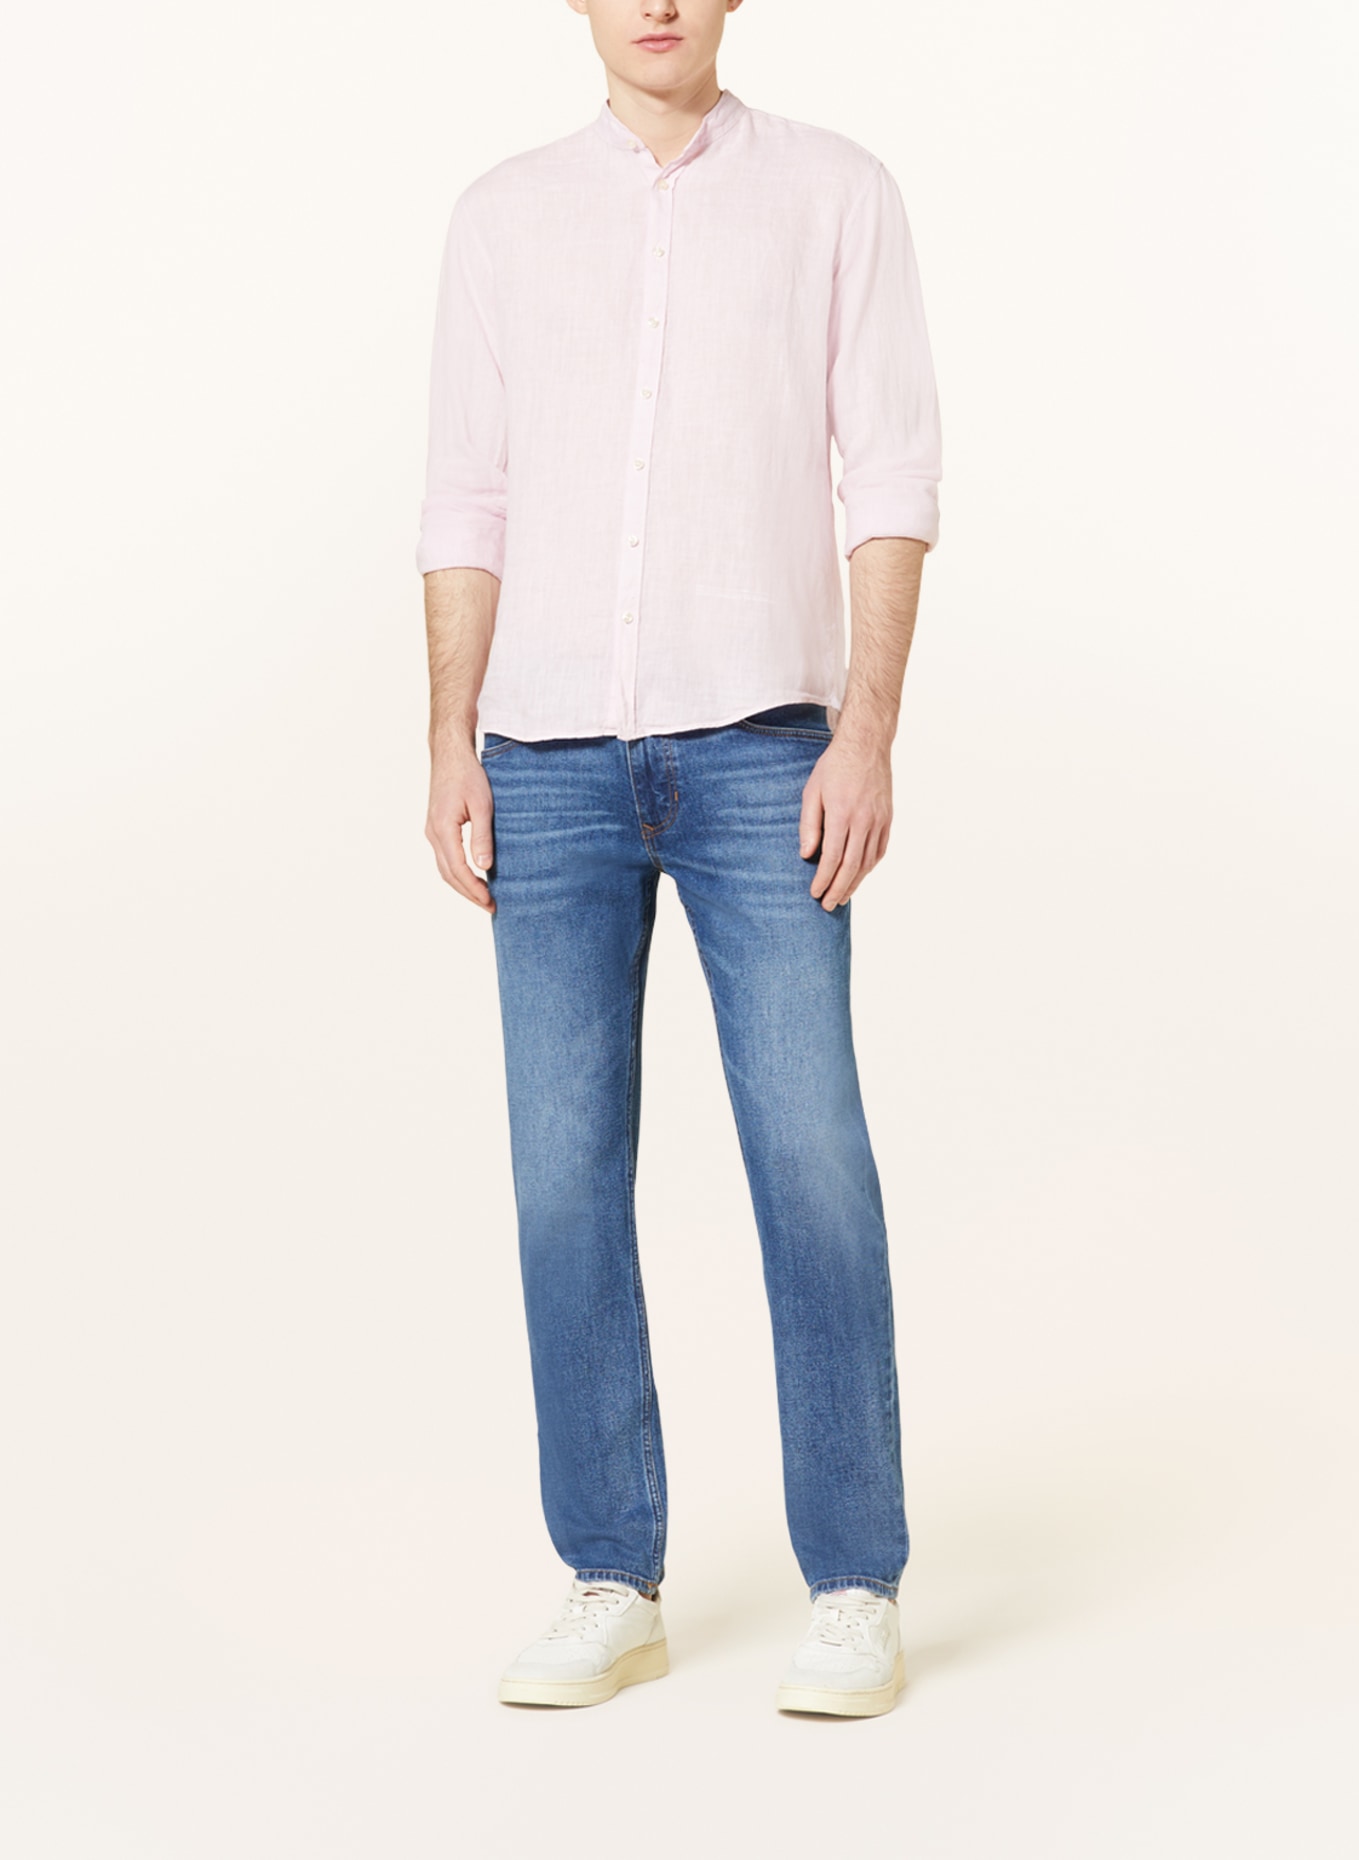 BETTER RICH Linen shirt regular fit with stand-up collar, Color: PINK (Image 2)